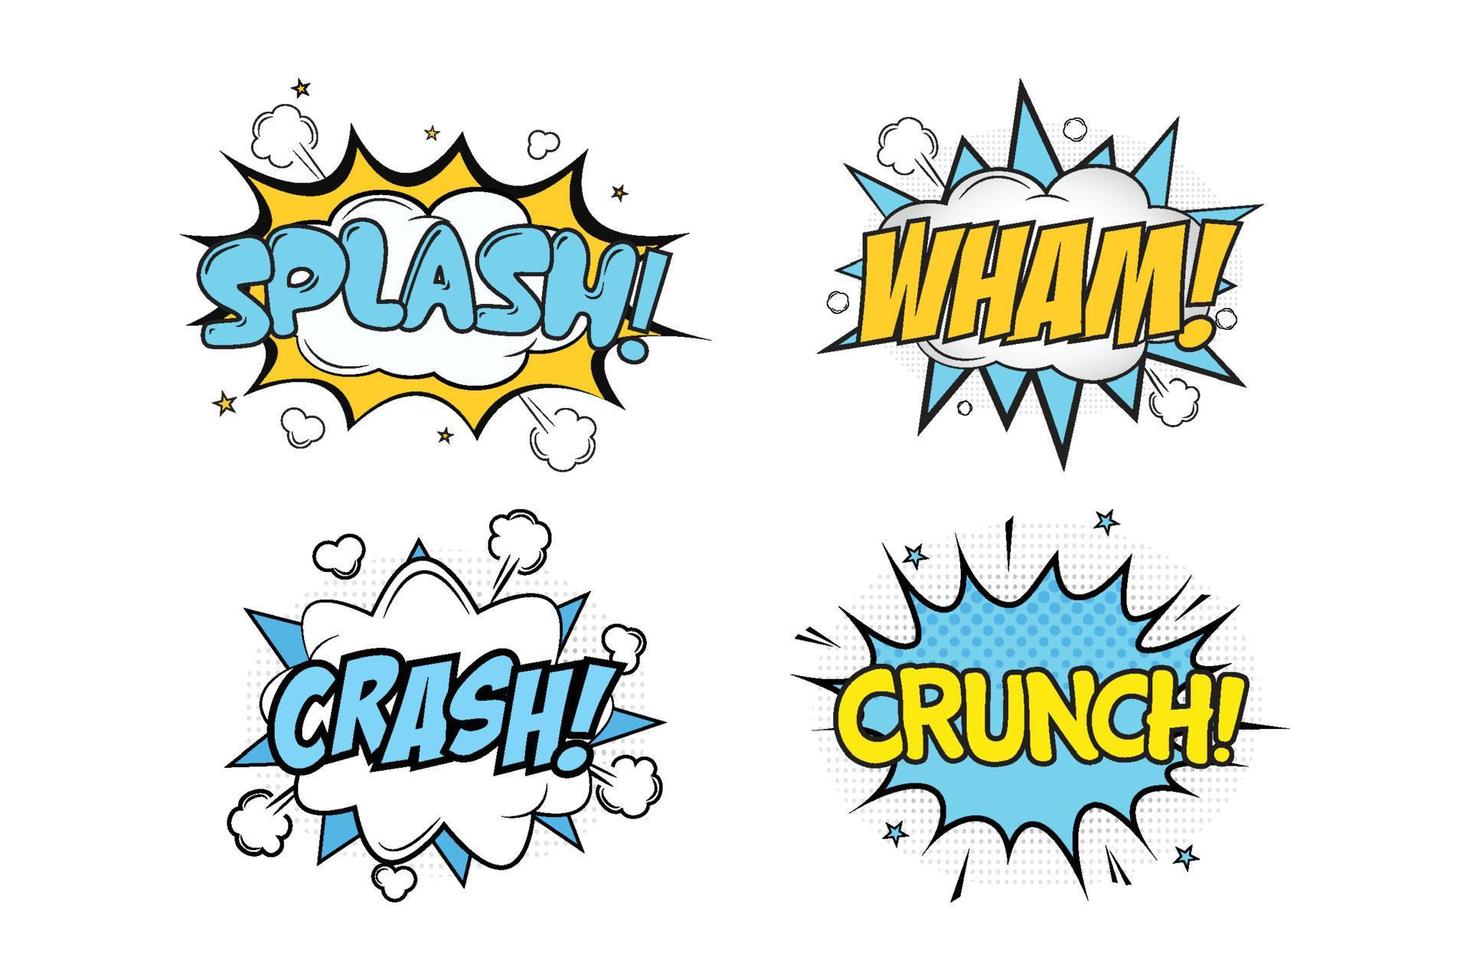 Splash Wham comic burst with white, blue, and yellow colors. Crash Crunch comic explosion with yellow, white, and blue colors. Text bubbles for cartoon speeches. Comic blast with colorful clouds. vector